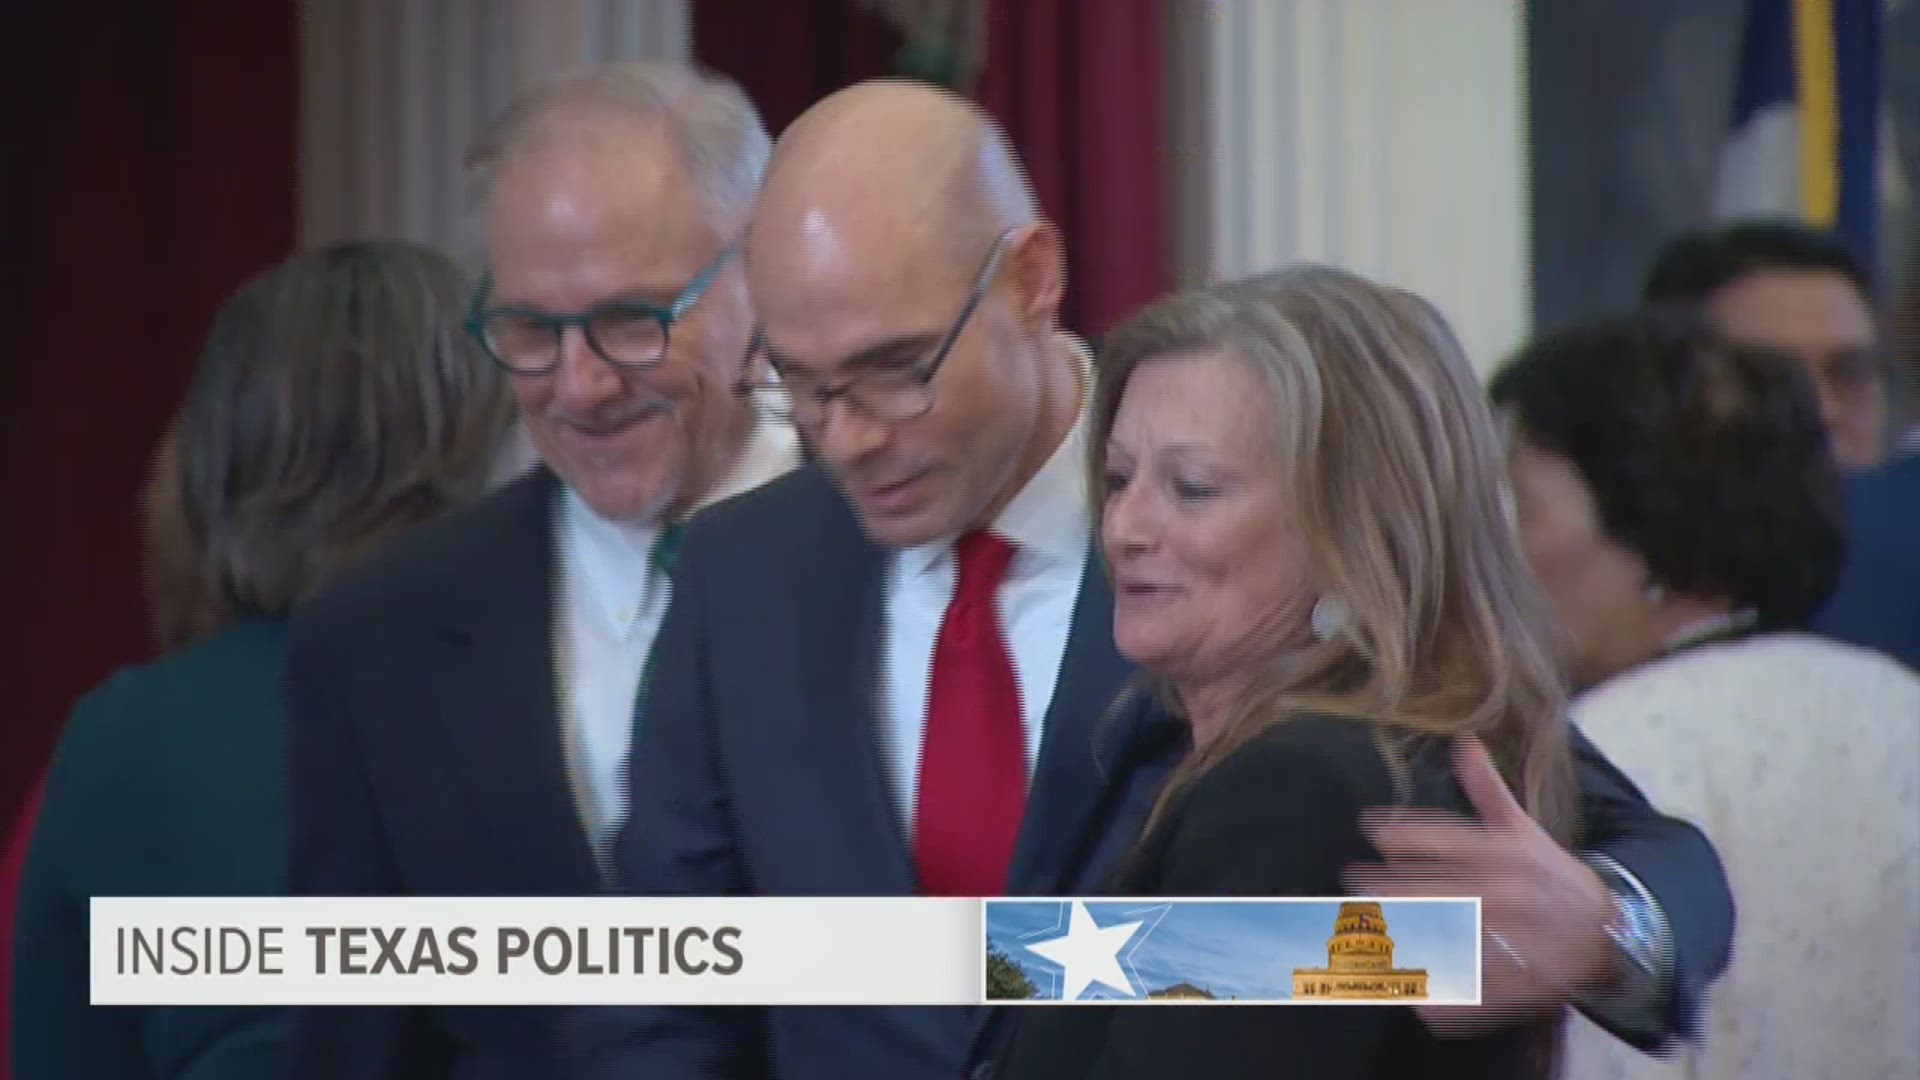 The secret recording of Texas House Speaker Dennis Bonnen is expected to be released this week.